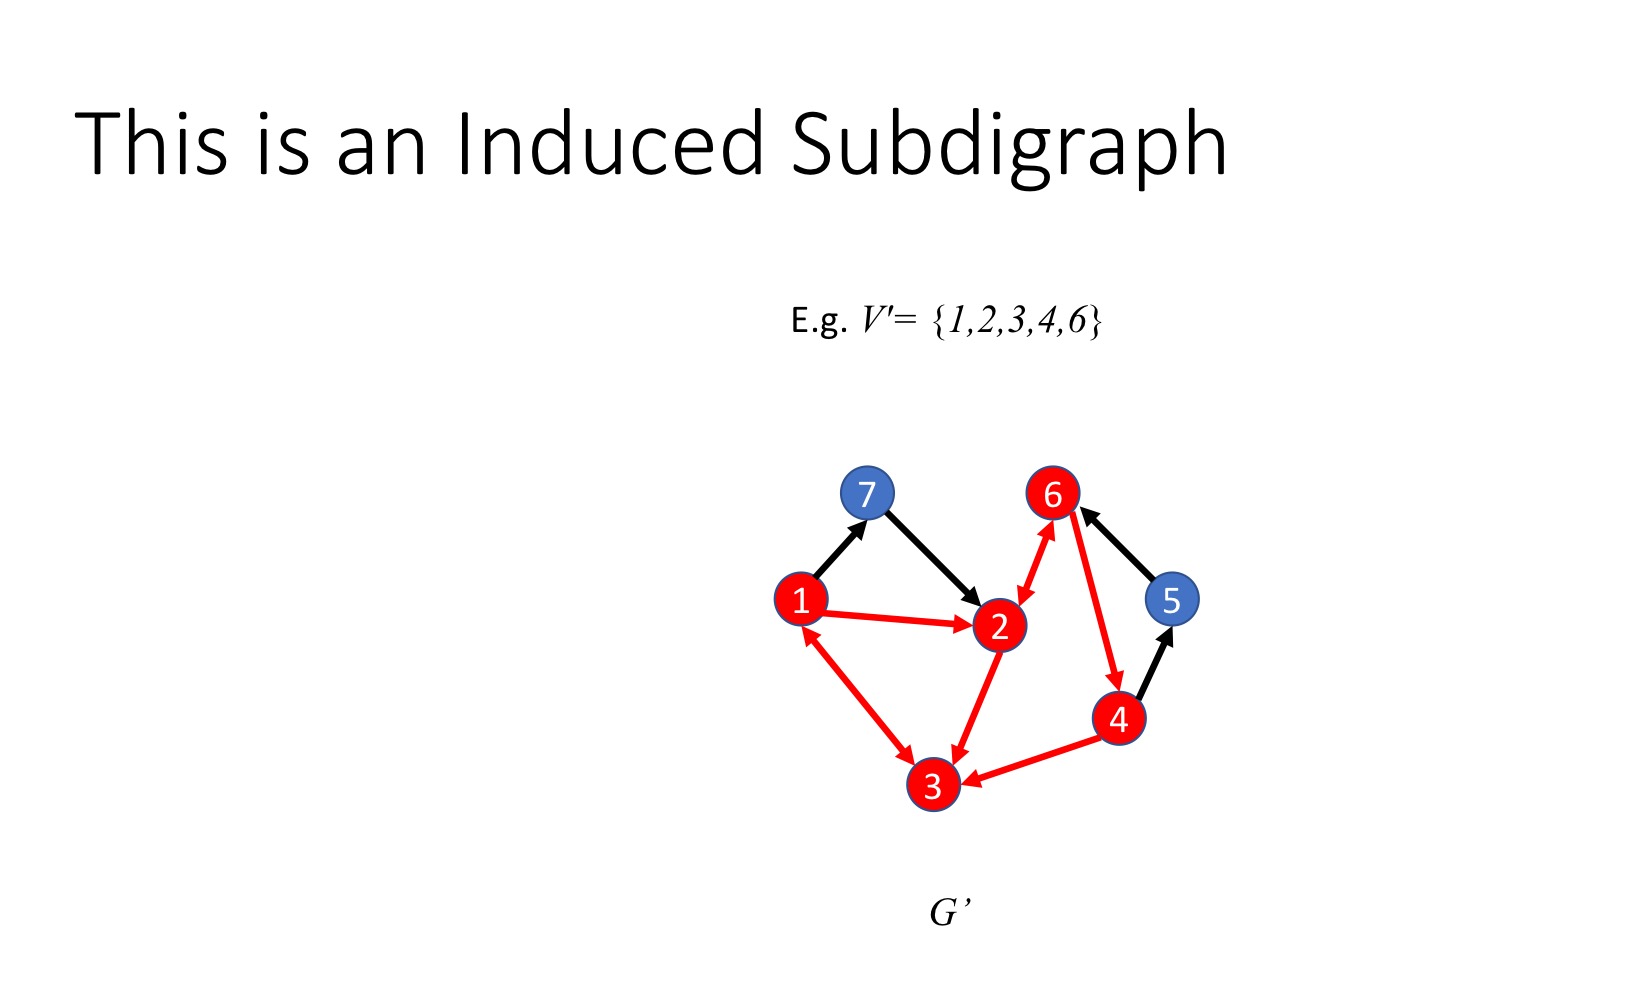 Is an Induced Subgraph